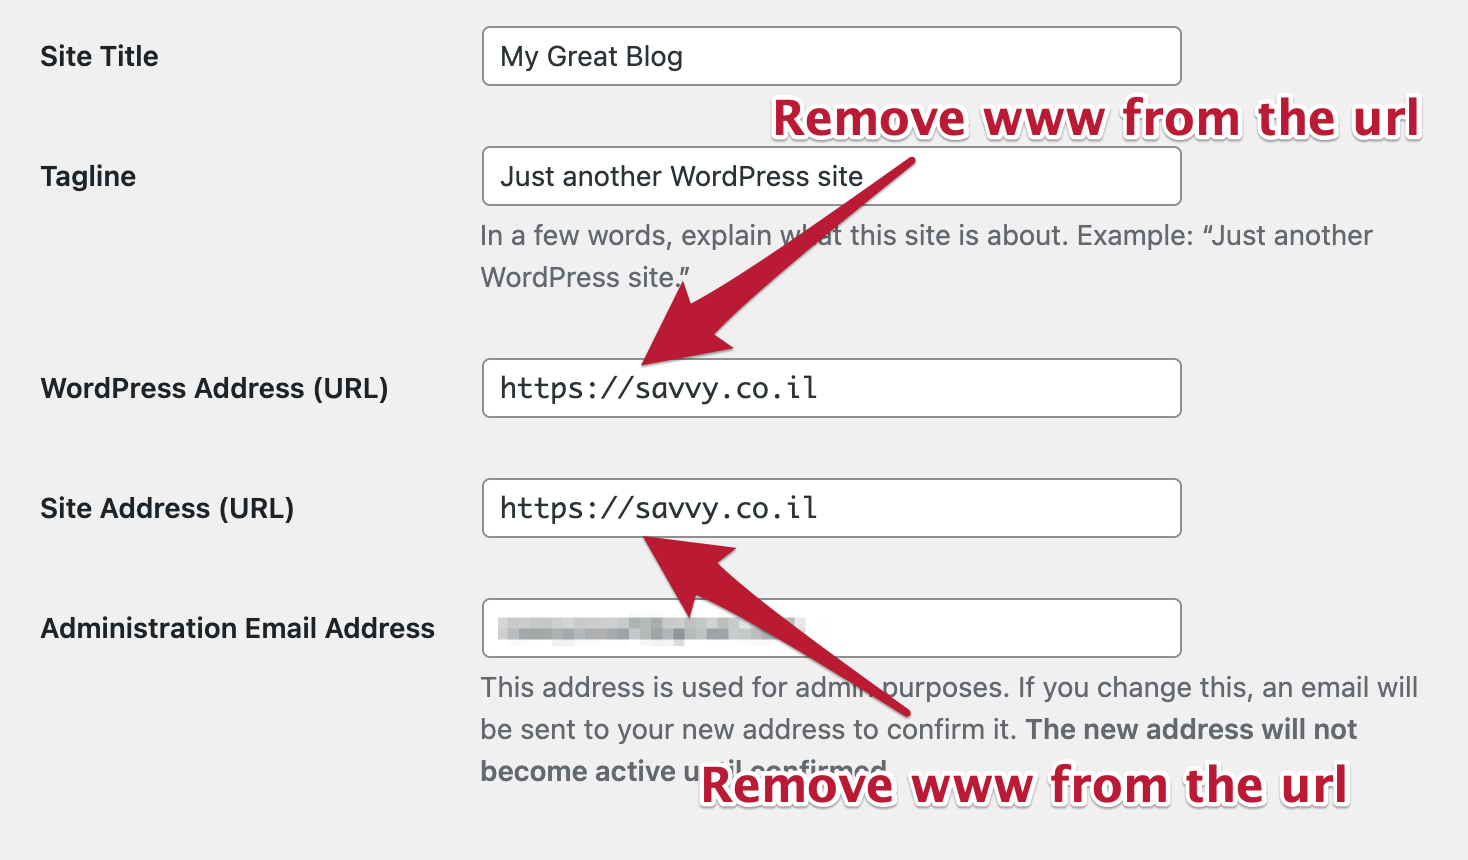 Removing www from the URL